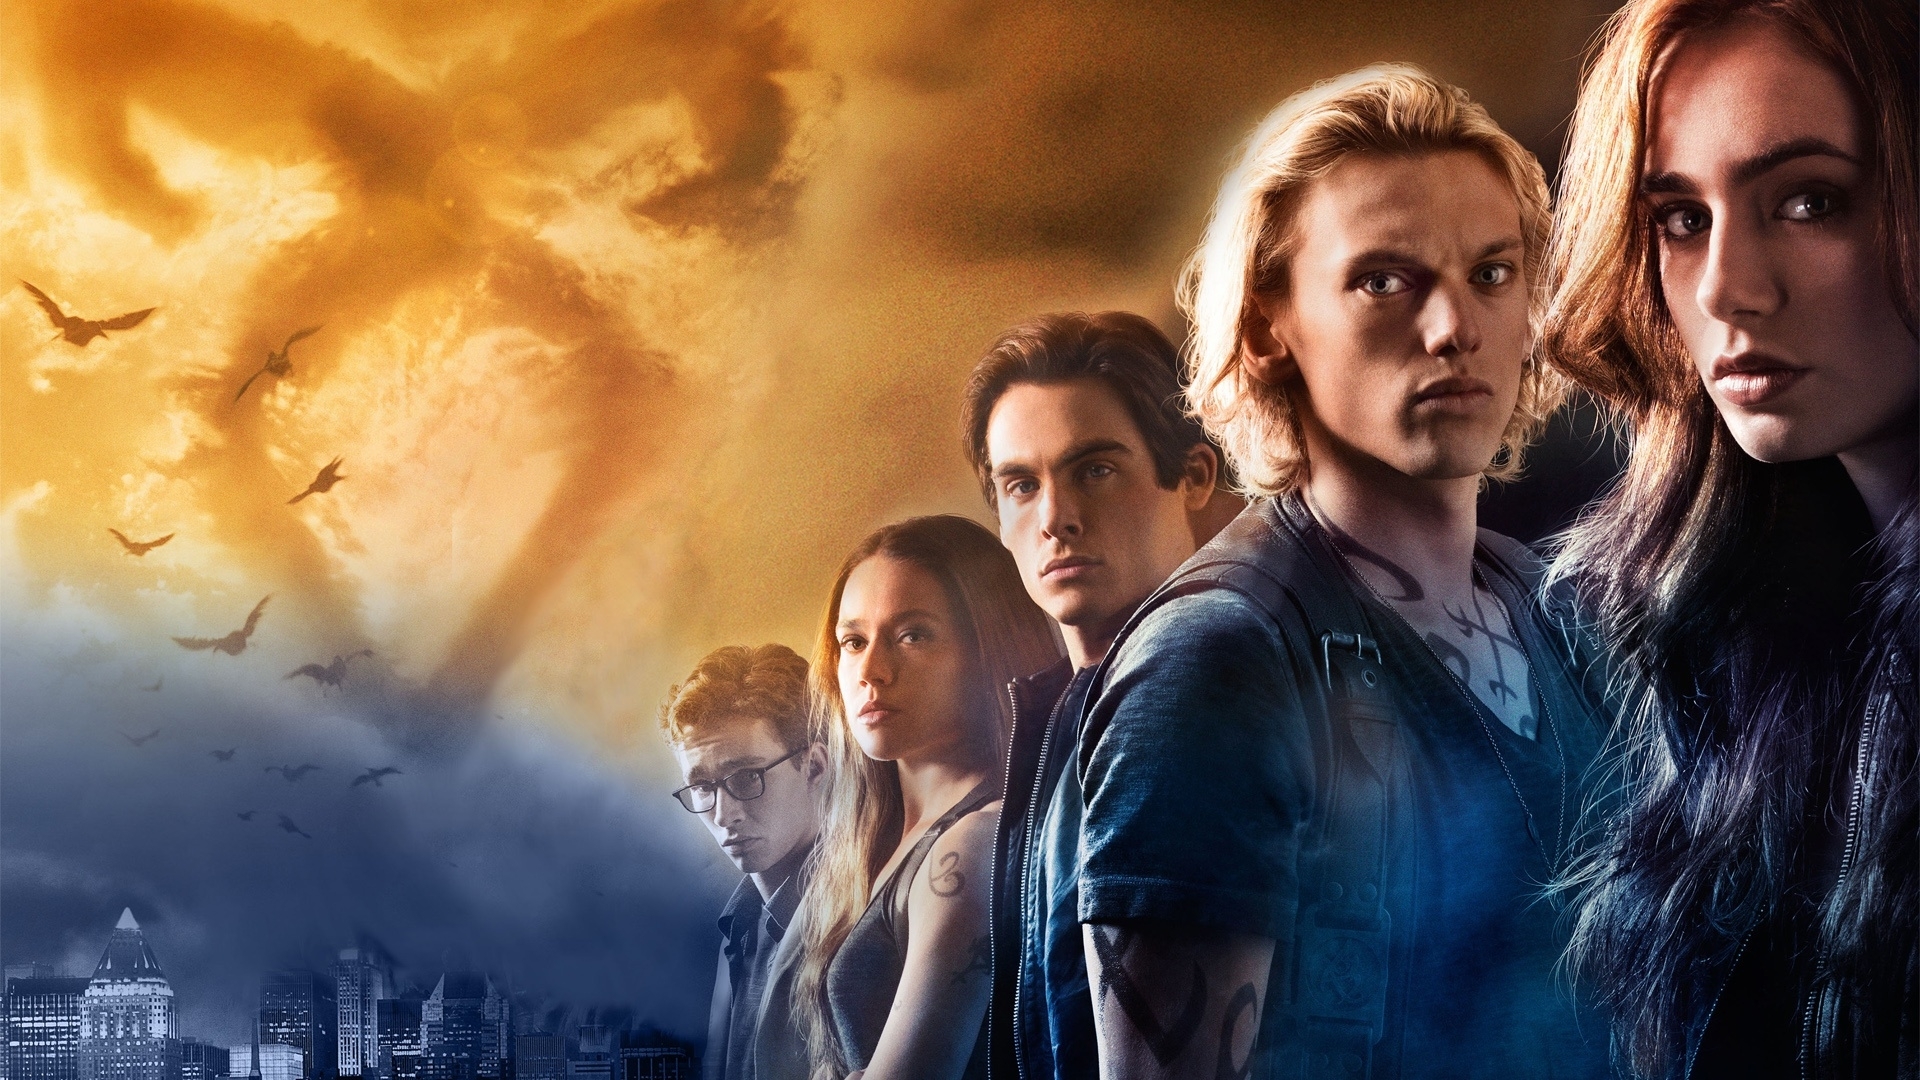 10 Latest The Mortal Instruments Wallpaper FULL HD 1080p For PC Background